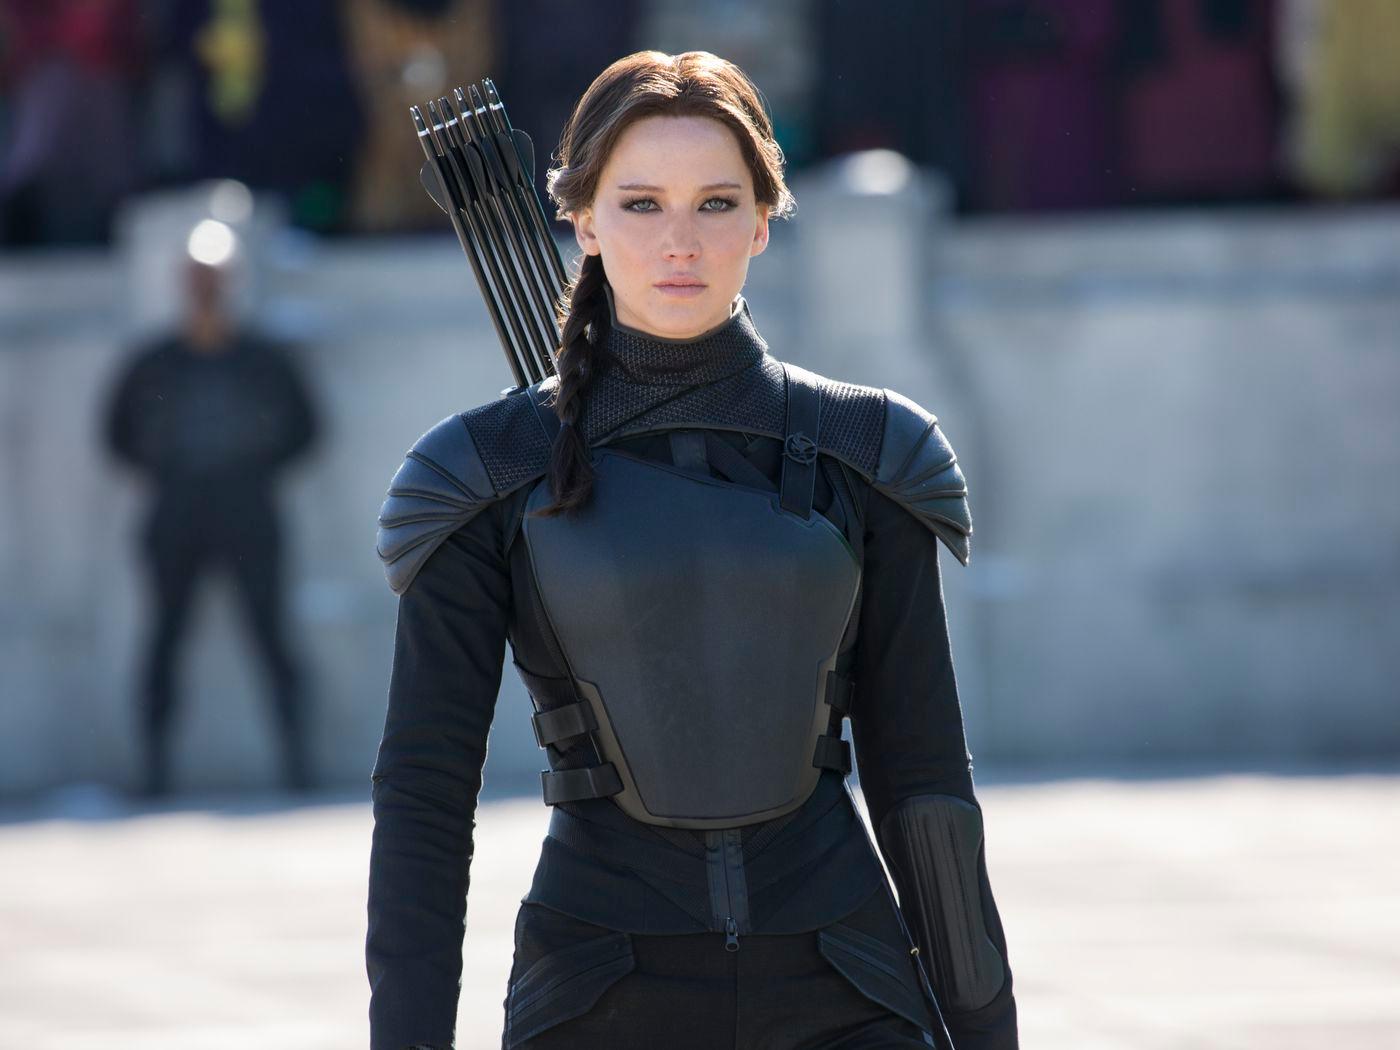 Jennifer Lawrence as Katniss Everdeen in The Hunger Games: Mockingjay Part 2. She is dressed all in black, wielding a bow and arrow.